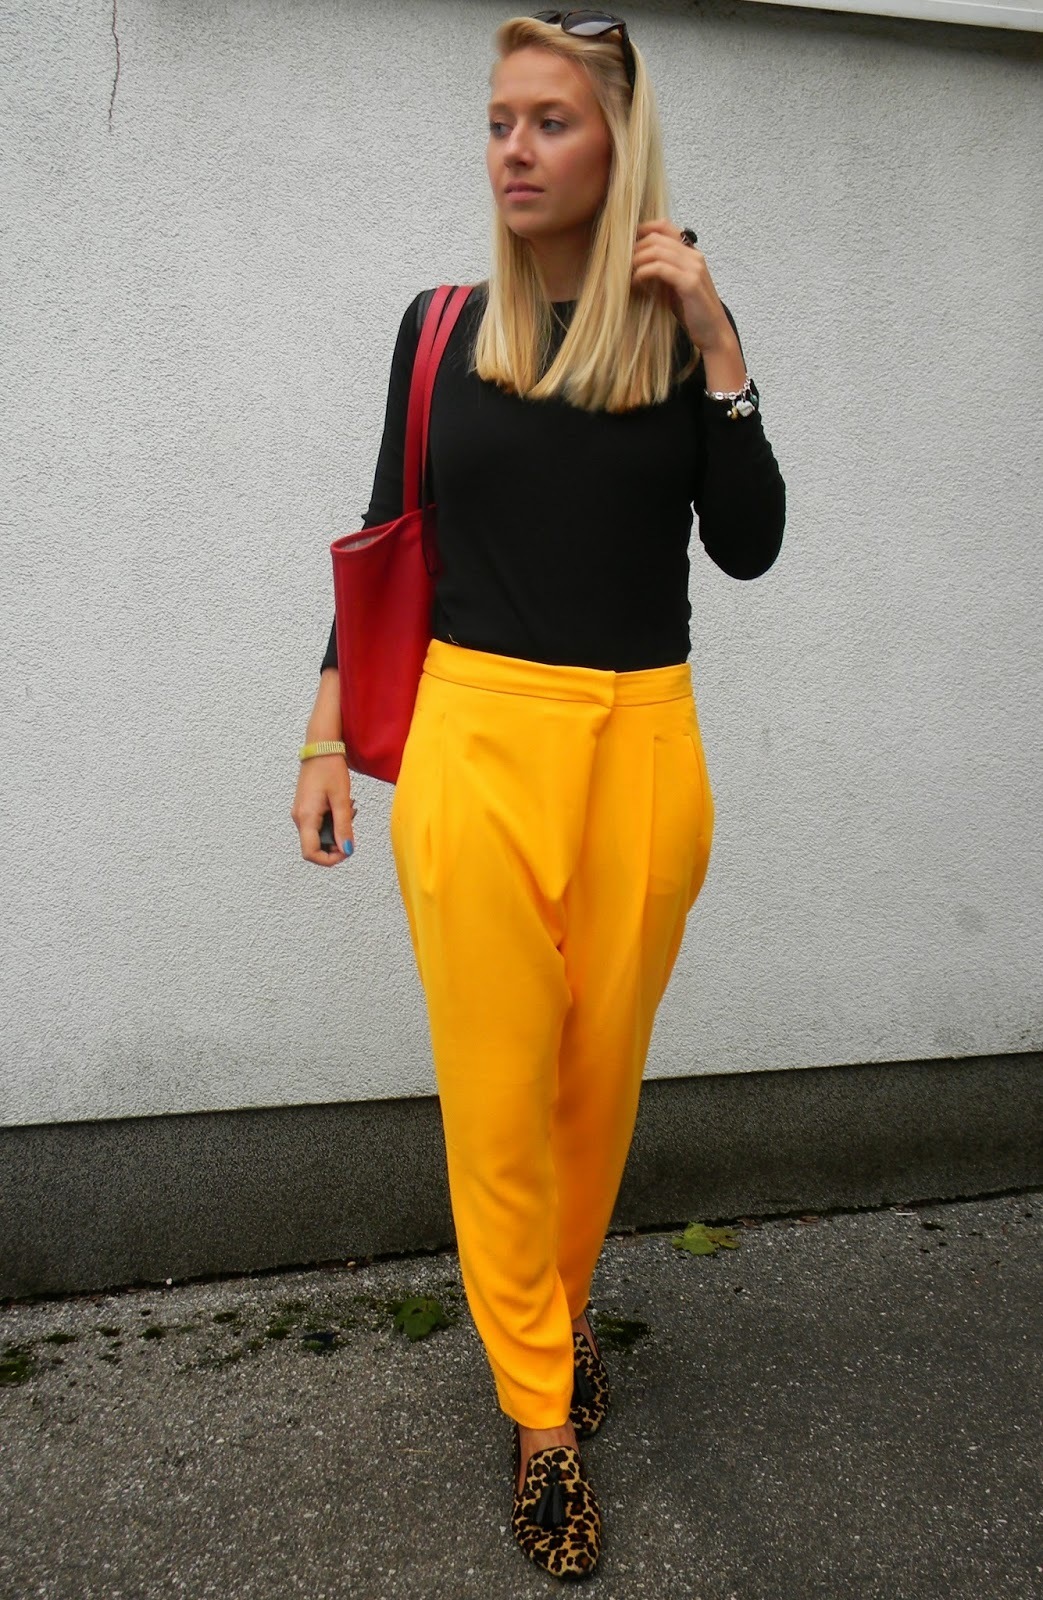 Denise Van Outen in Bright Mustard Yellow Pants and a Black Jumper - Leeds  03/15/2021 • CelebMafia